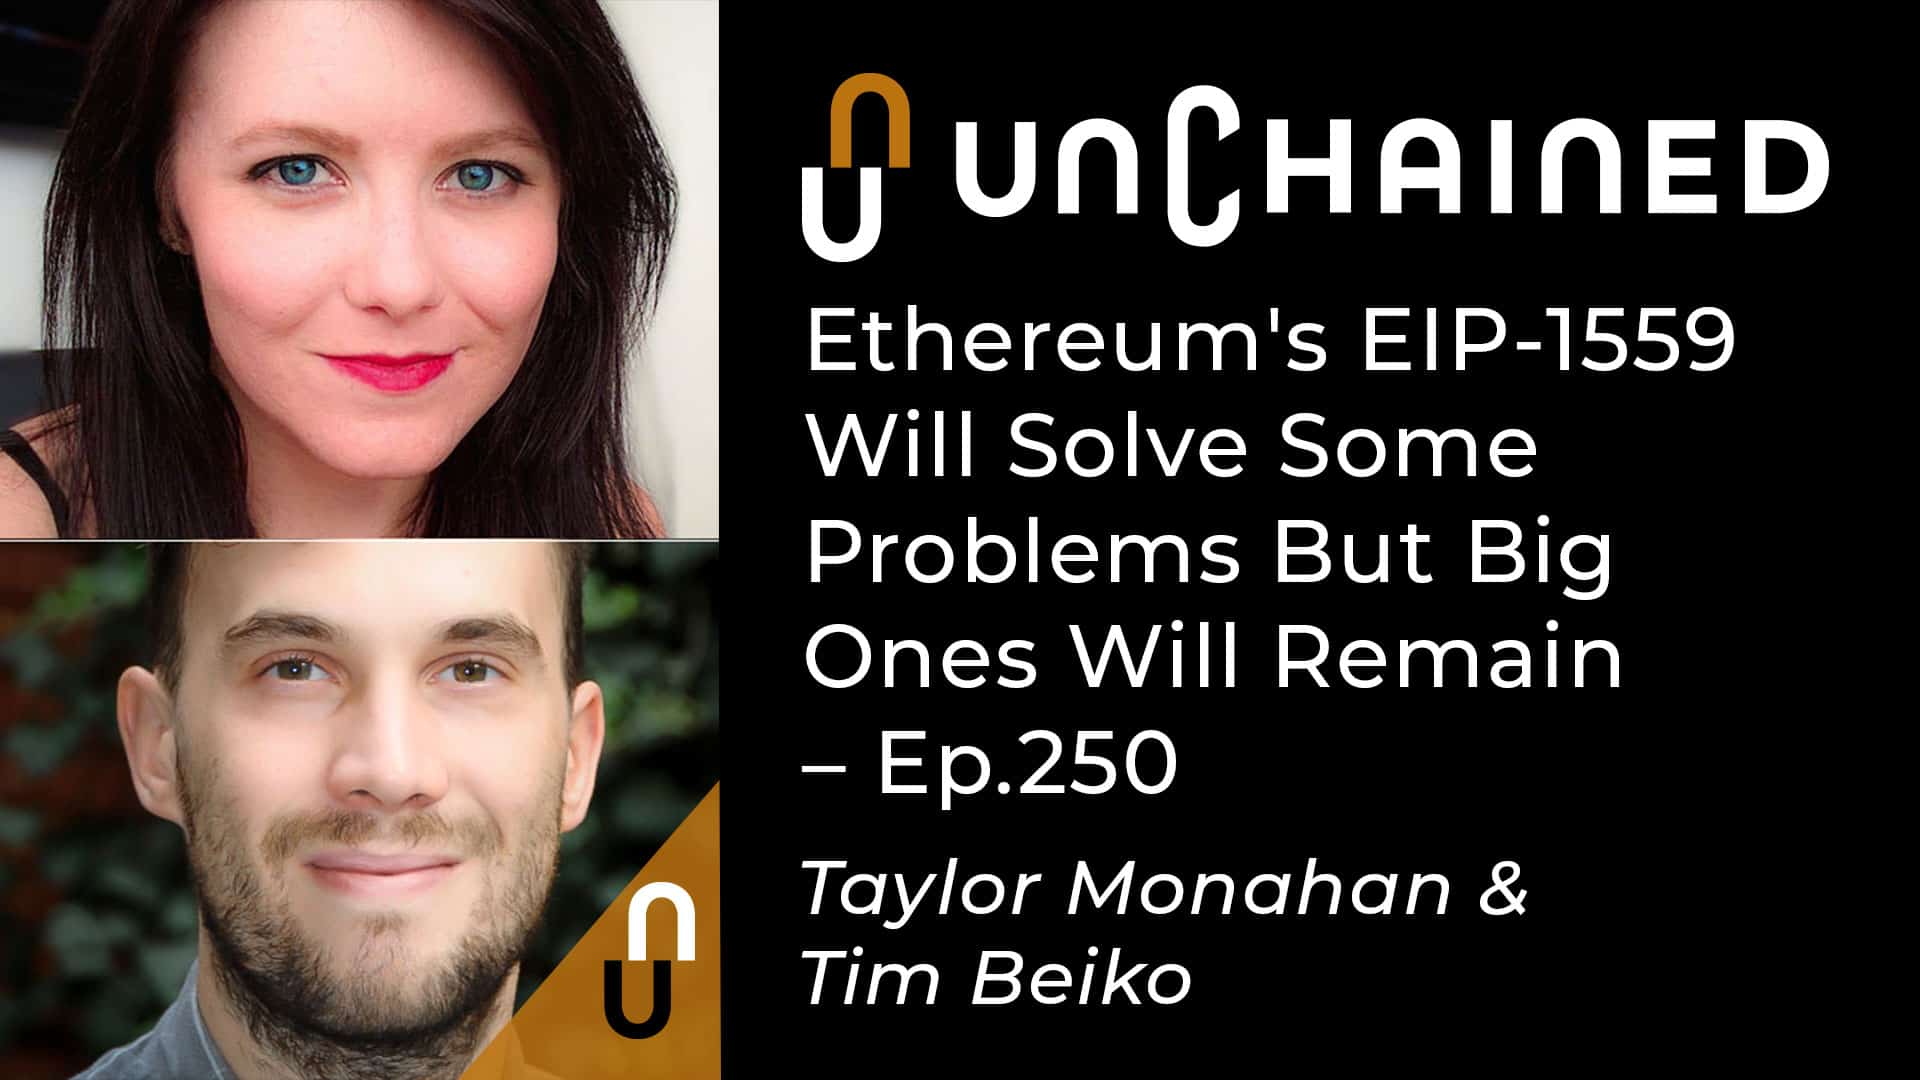 Unchained - Ep.250 - Ethereum's EIP-1559 Will Solve Some Problems But Big Ones Will Remain